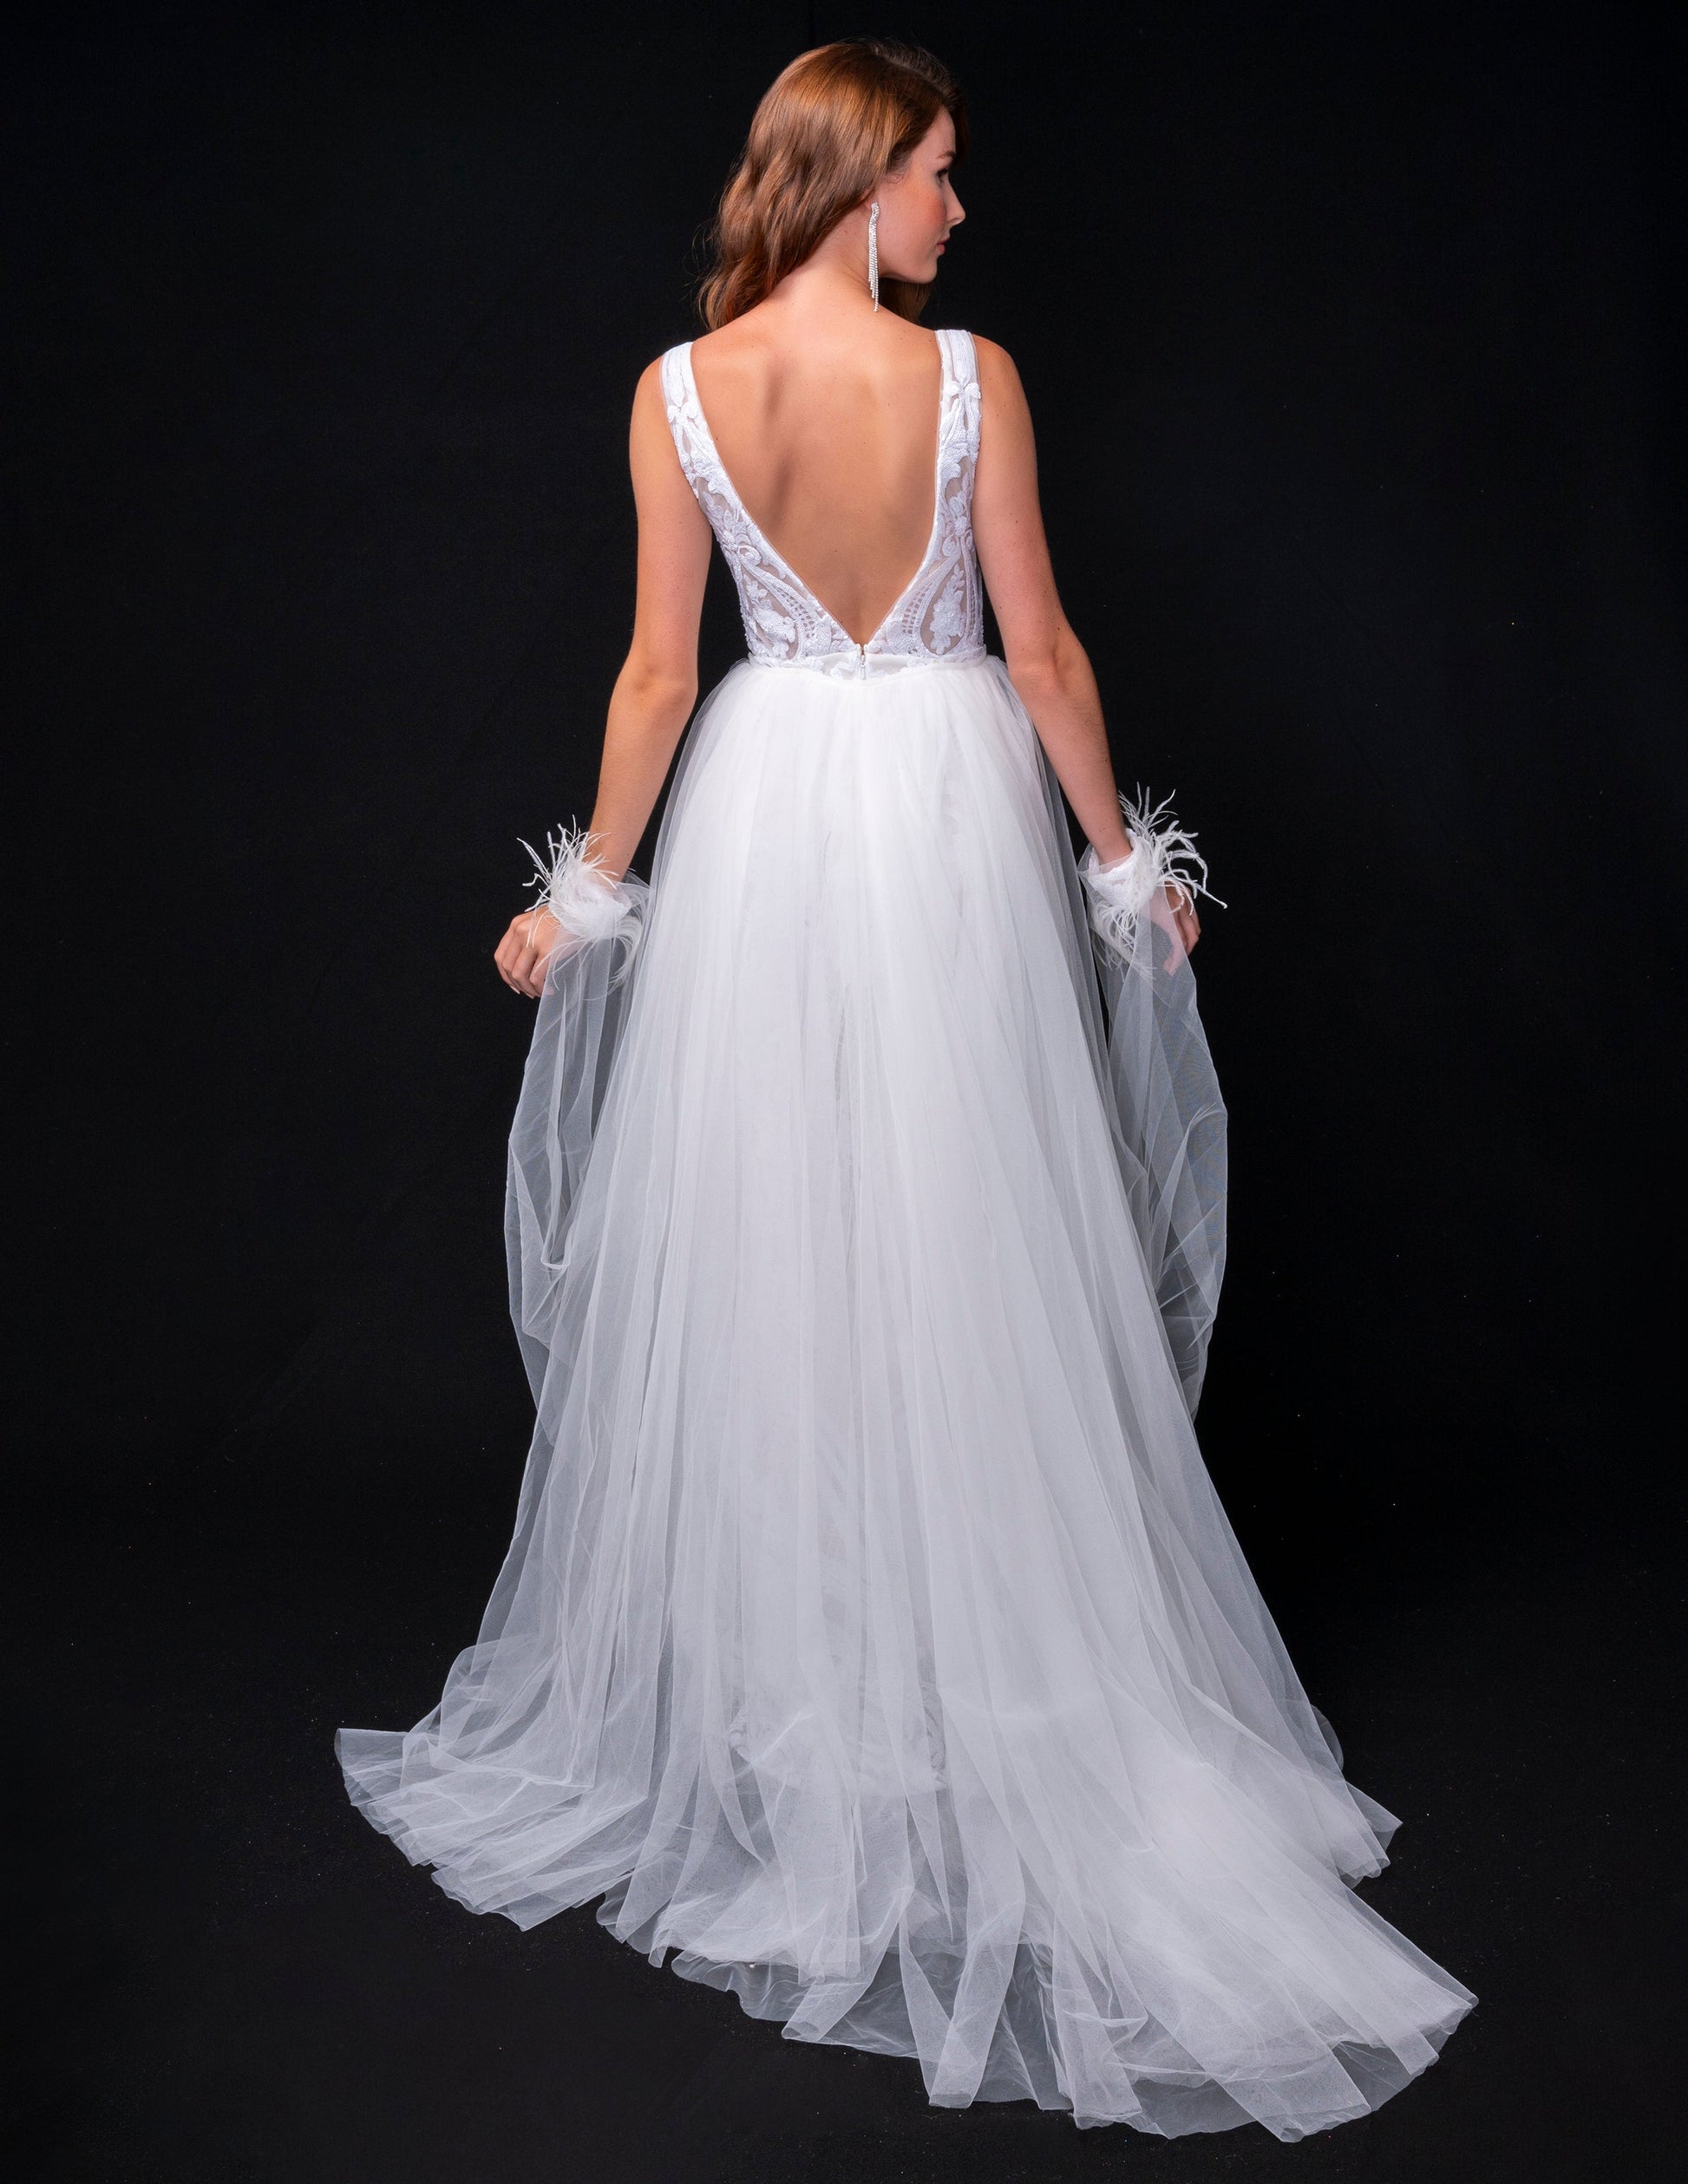 <p data-mce-fragment="1">This stunning Nina Canacci 8224 long, fitted pageant dress features a dazzling sequin design and a detachable tulle overskirt with a feather cuff. The elegant V-neckline adds a touch of sophistication to this show-stopping gown. Perfect for any formal event or pageant, this dress is sure to make a statement.</p> <p data-mce-fragment="1">&nbsp;</p>